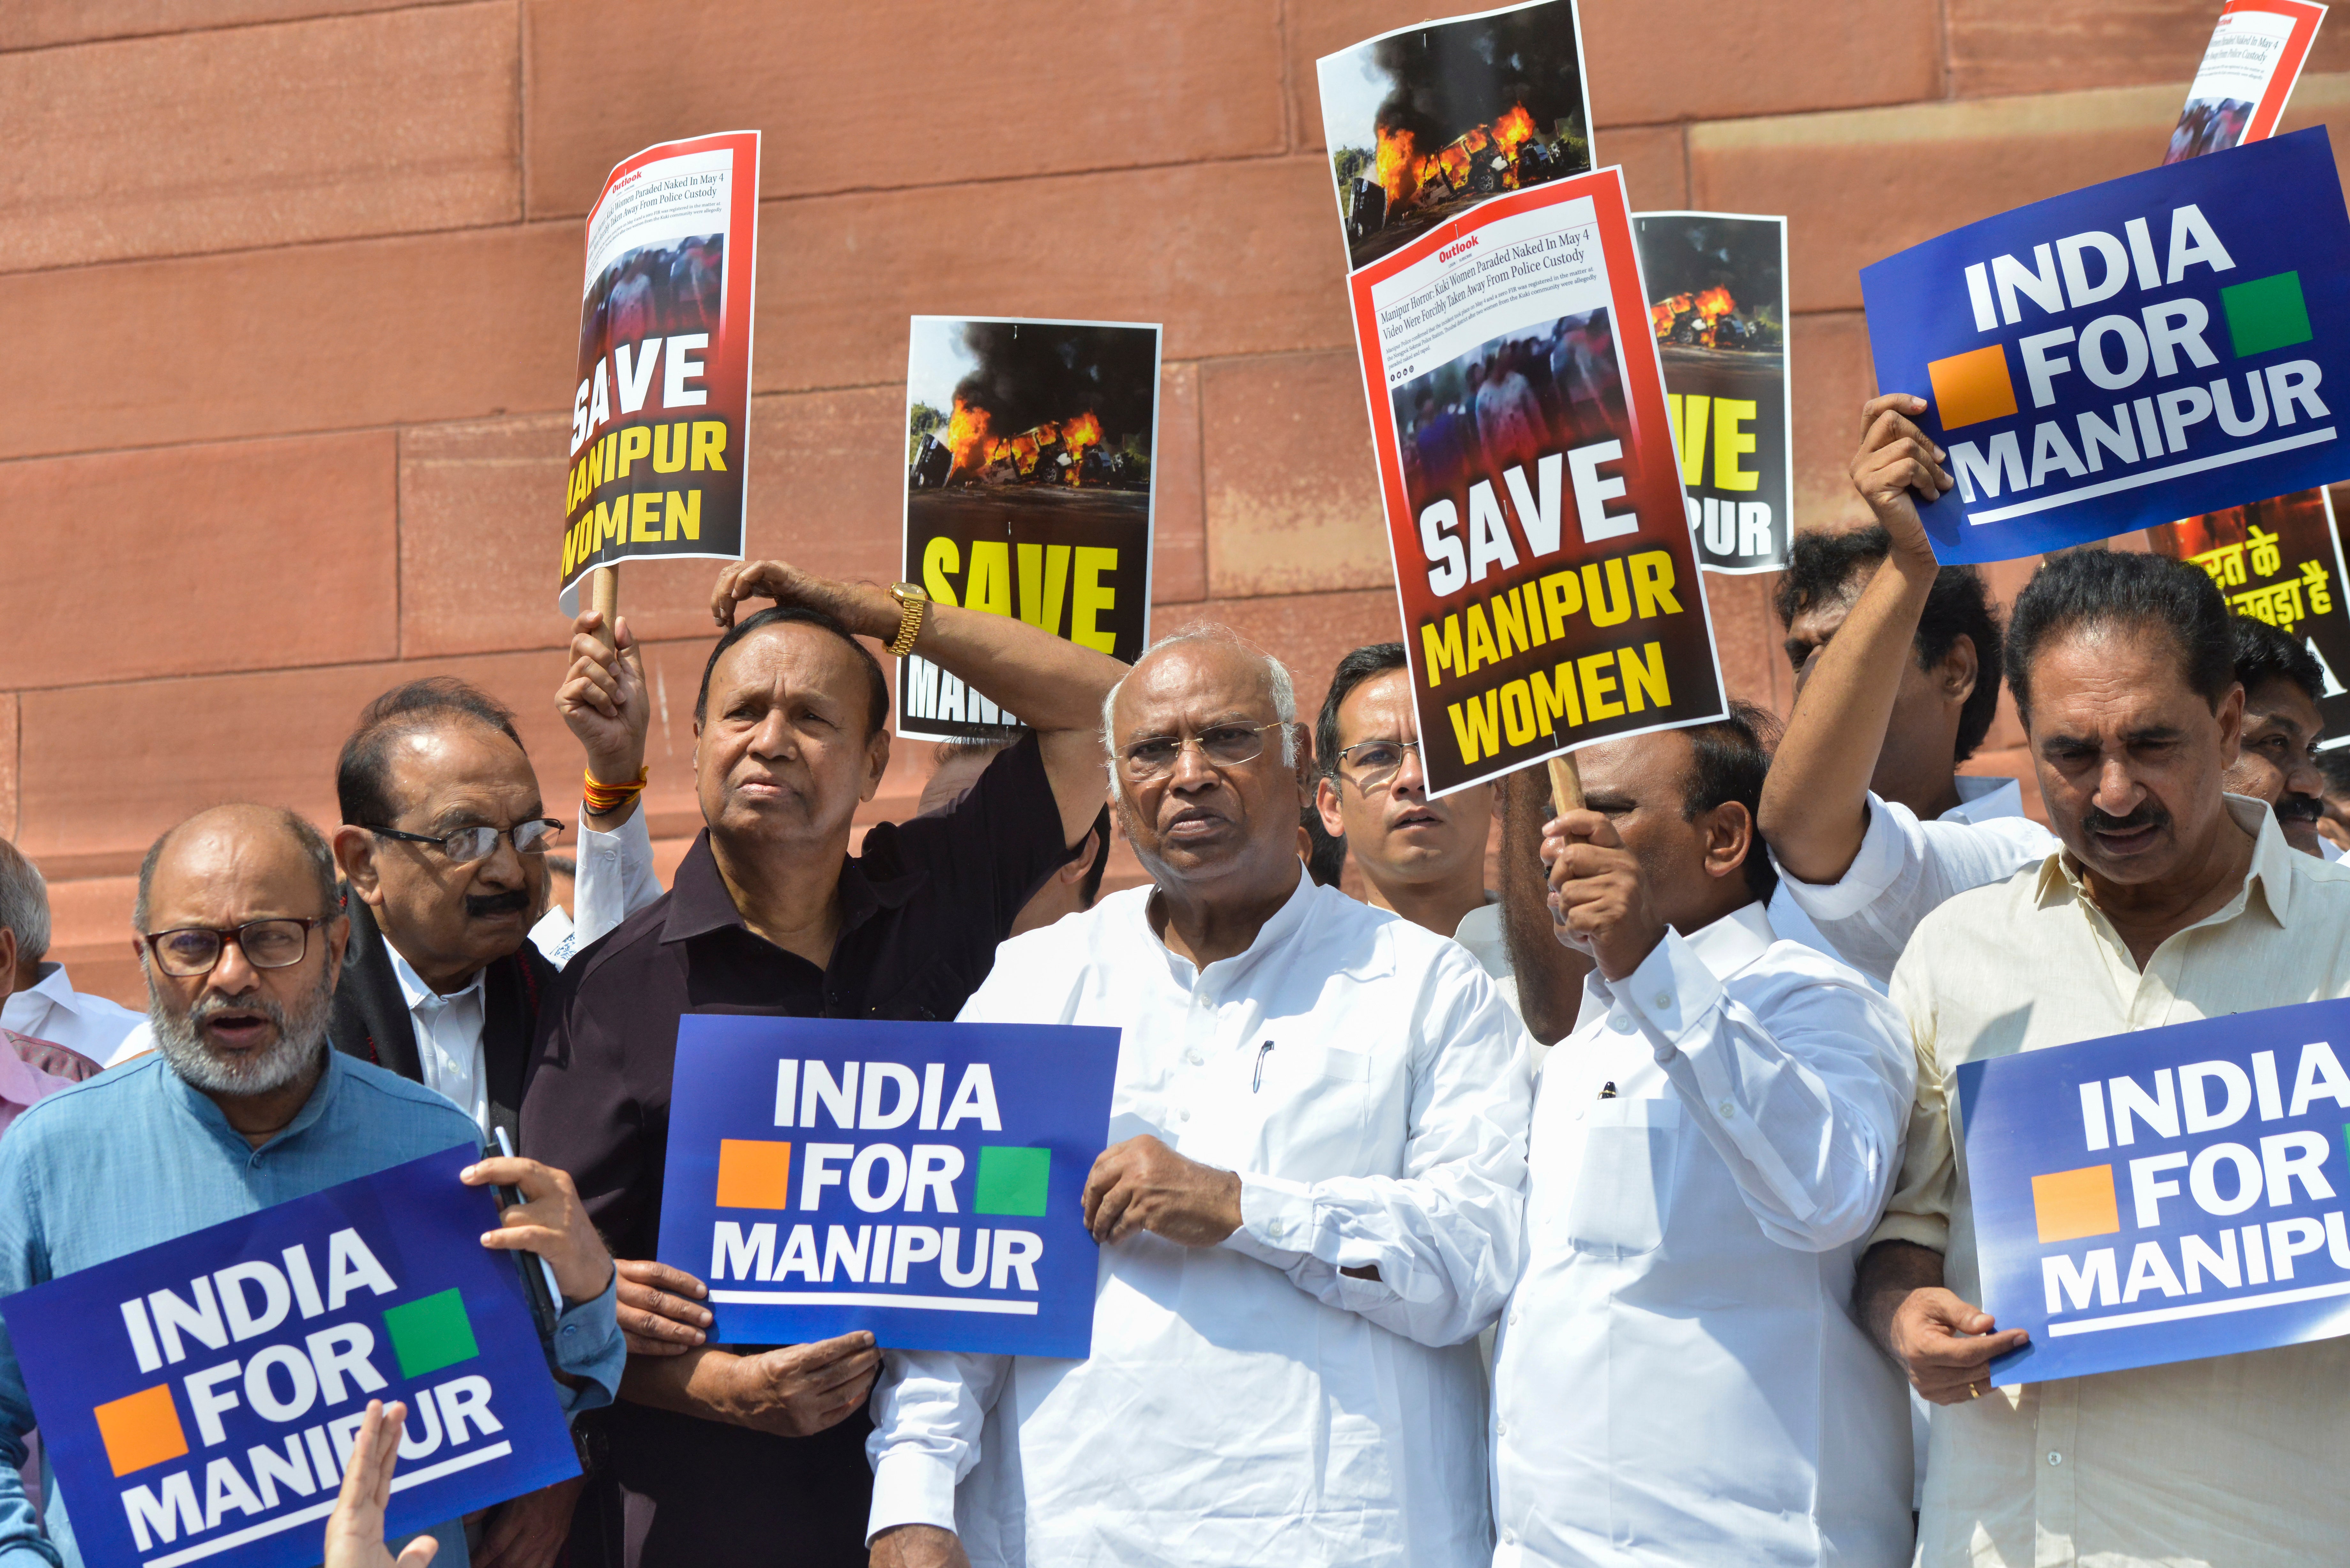 Opposition lawmakers demanding a statement from Prime Minister Narendra Modi on the violence in Manipur state carry placards outside the Parliament building in New Delhi